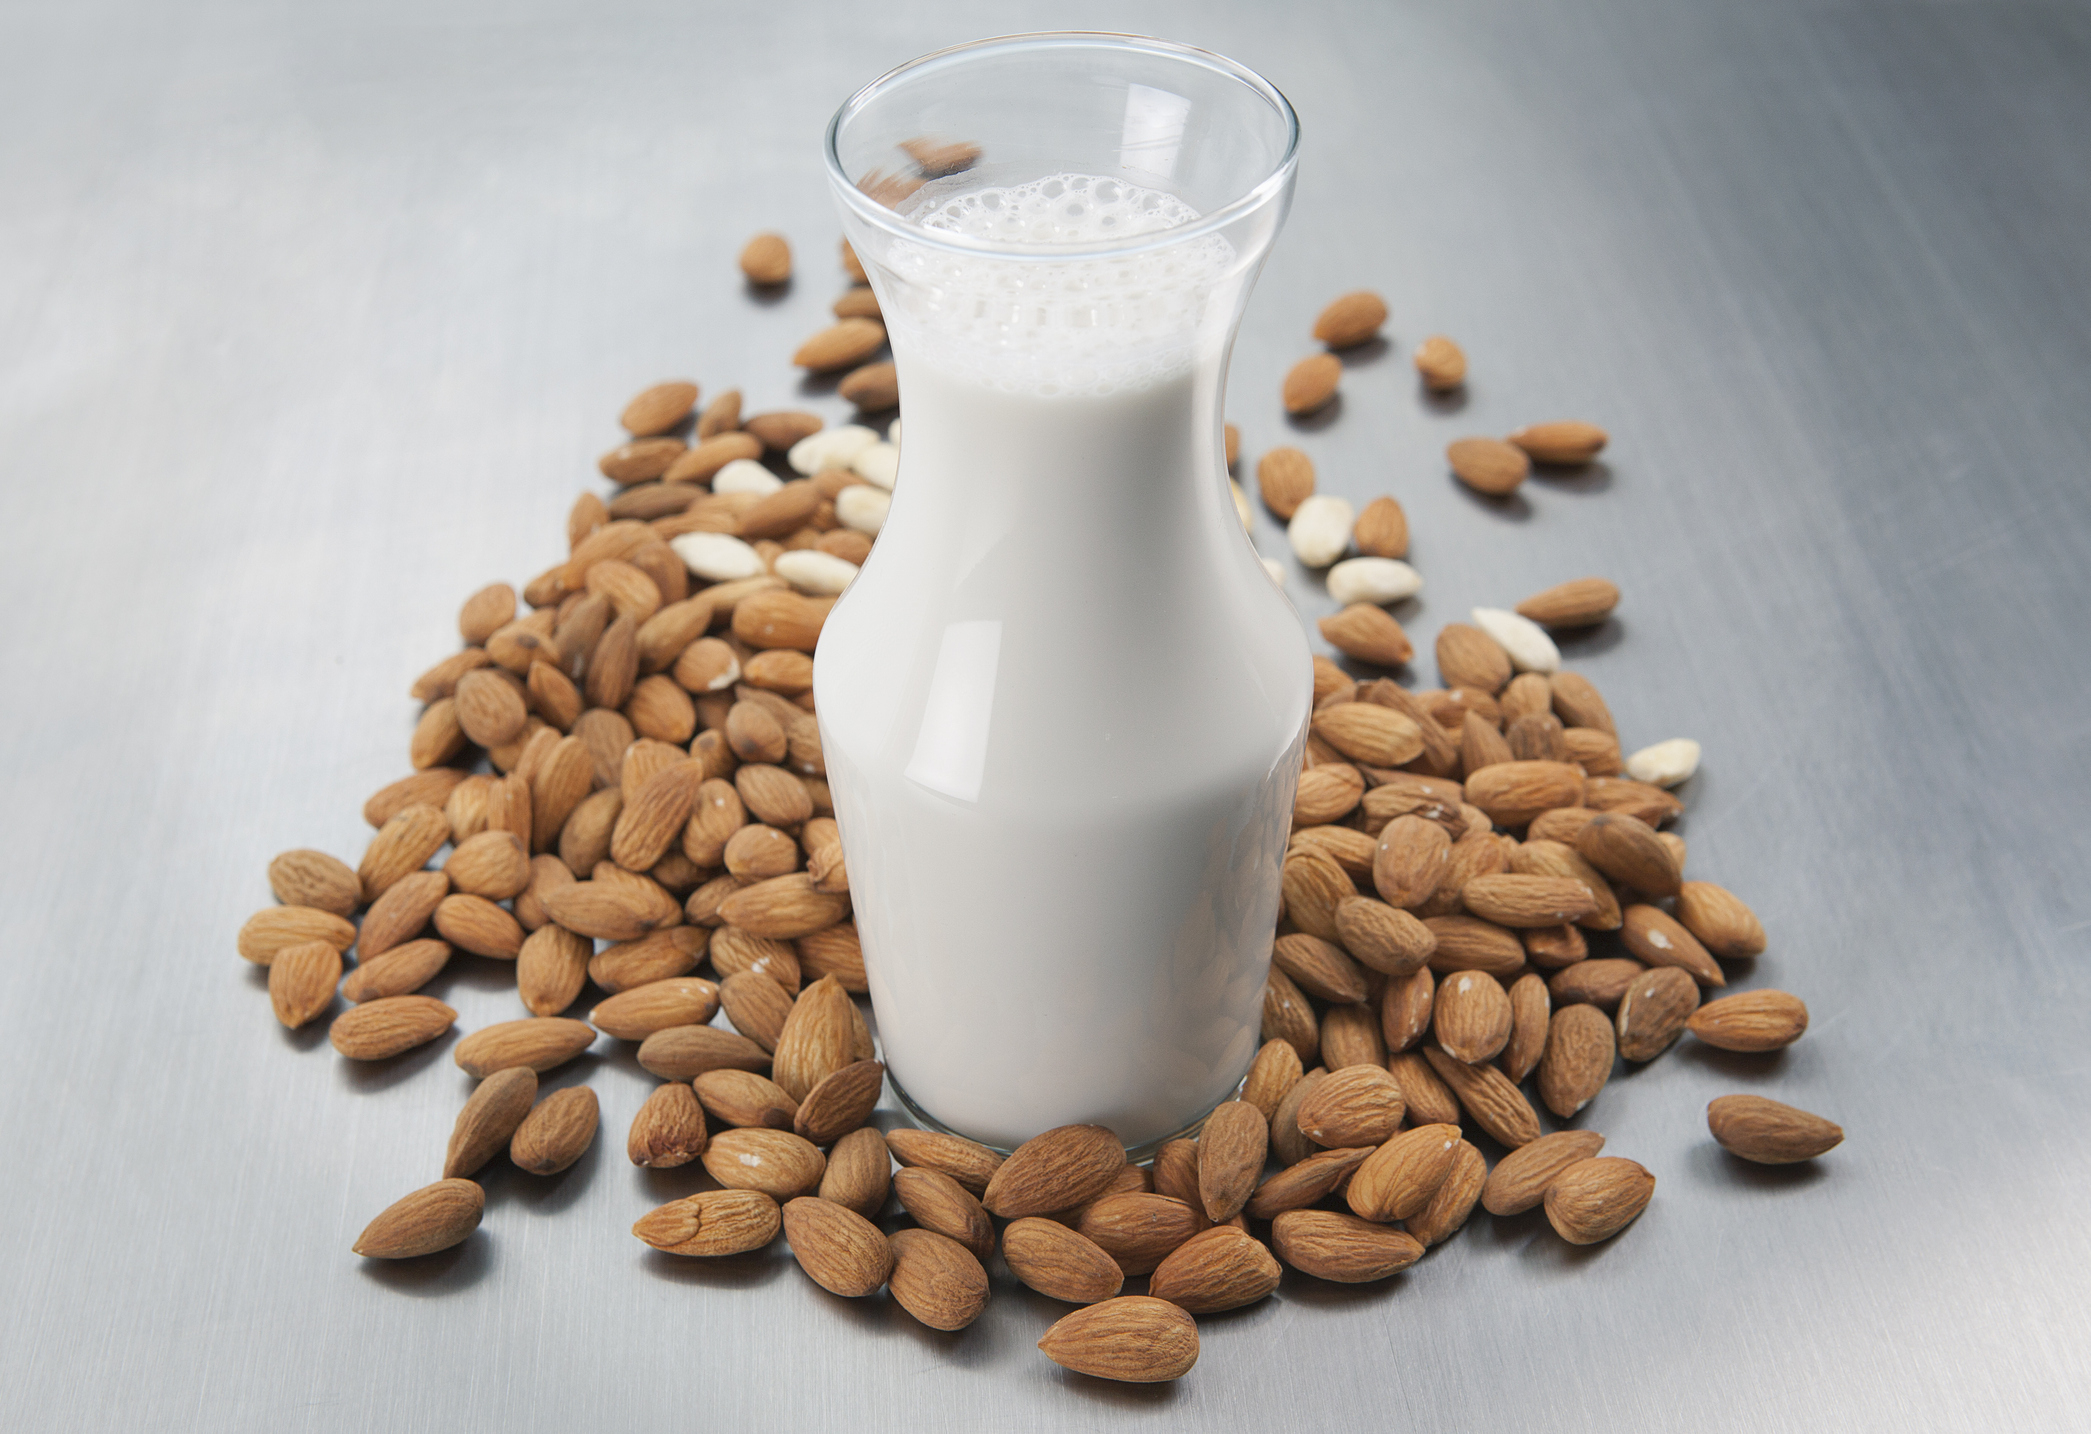 Almonds surrounding a cup of milk